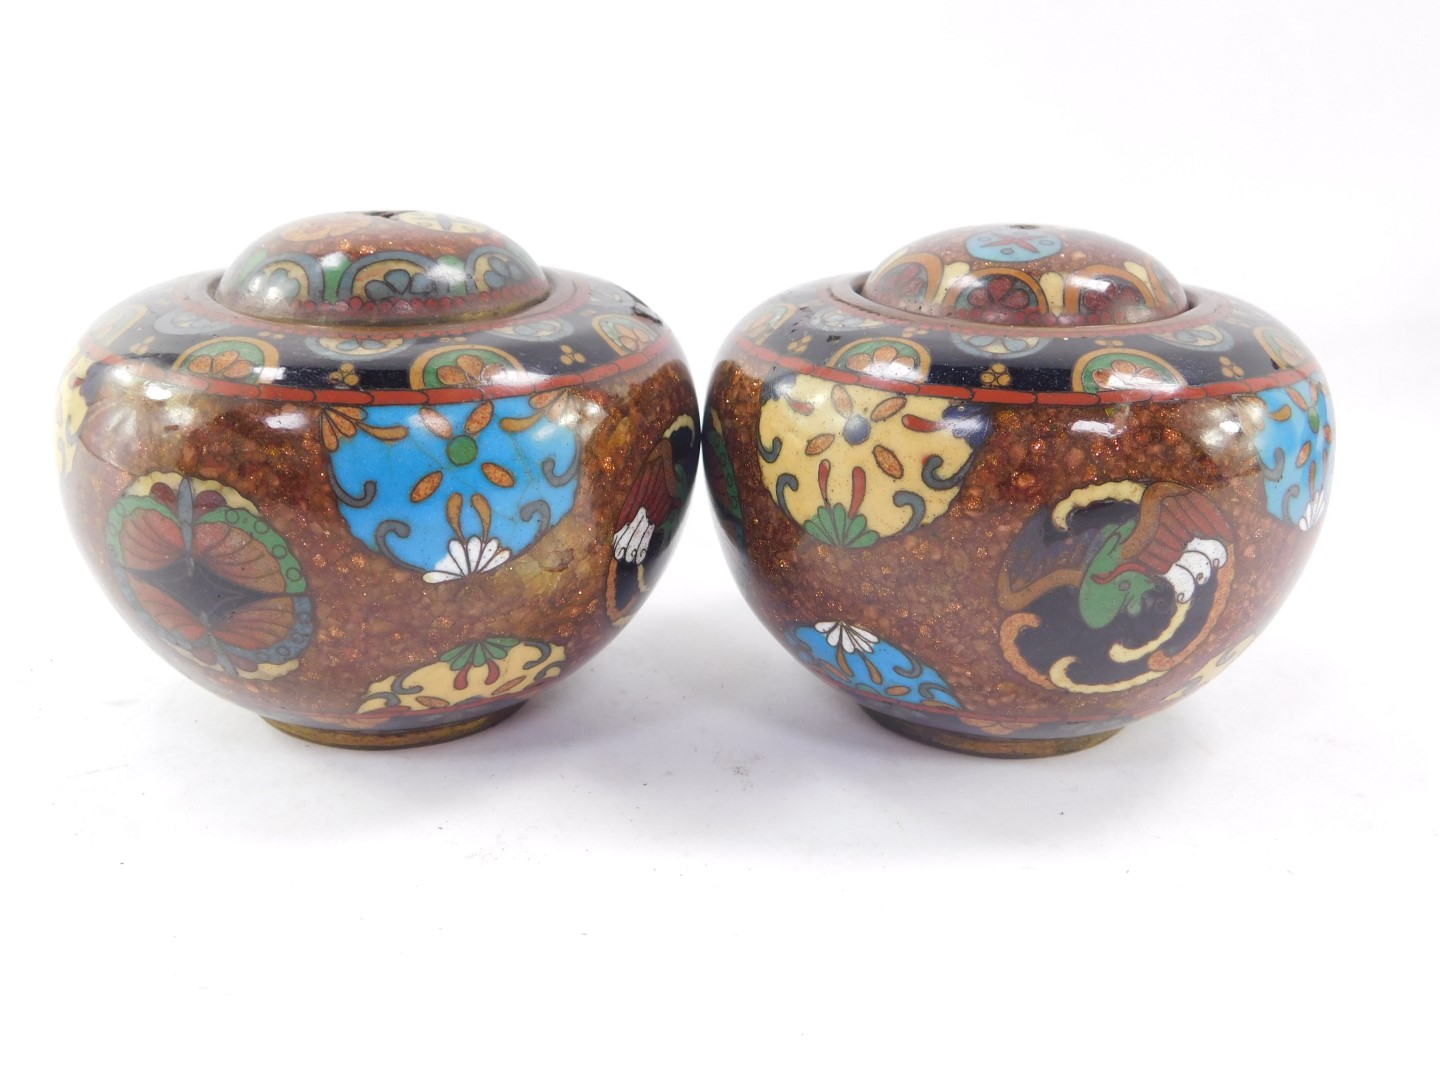 A pair of Qing Dynasty cloisonne pots and covers, of cylindrical form, decorated with birds, Buddhis - Image 3 of 4